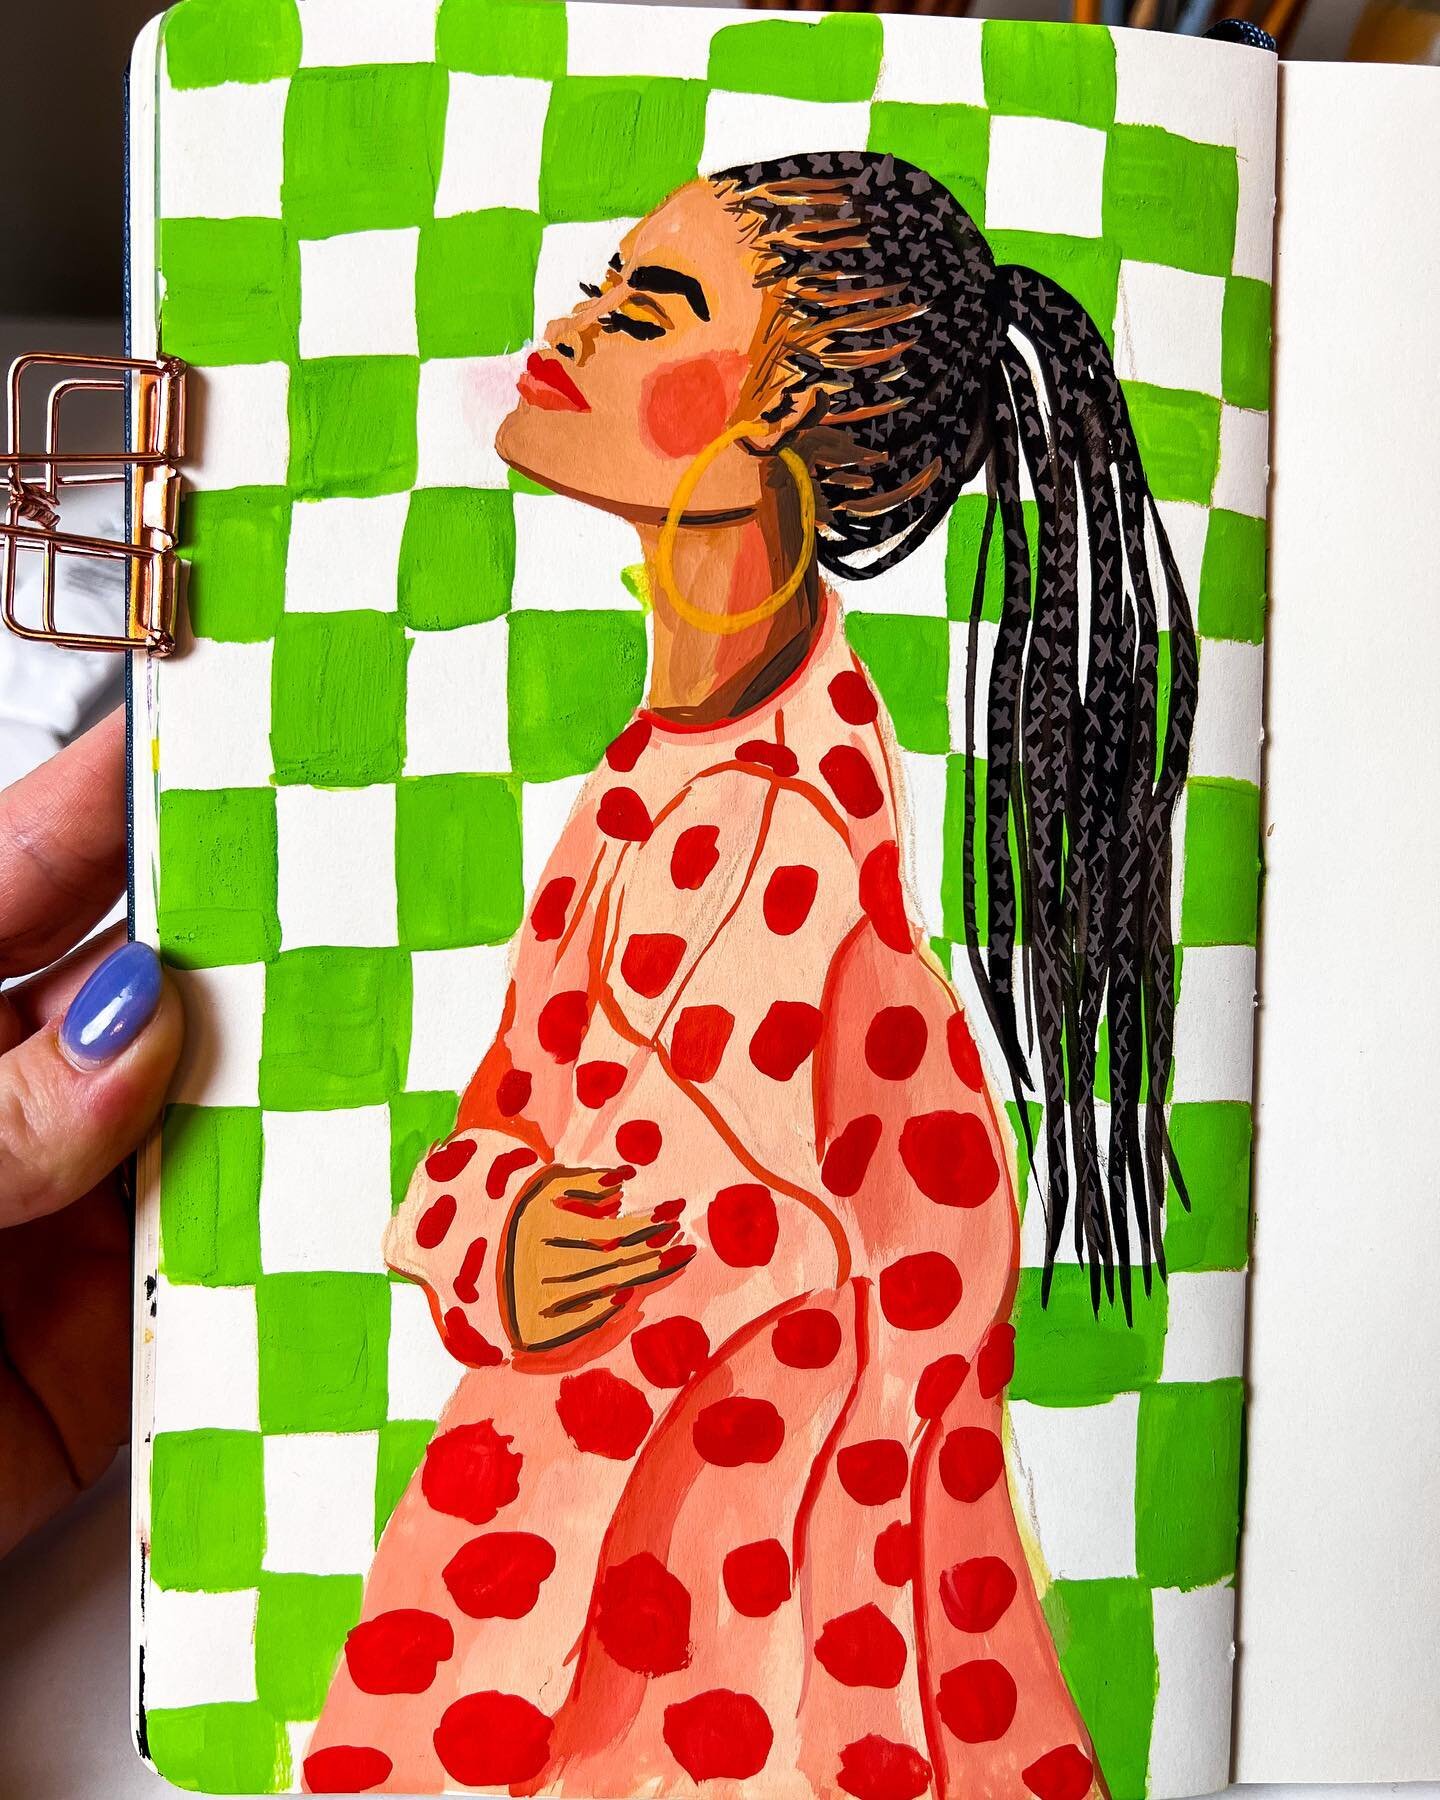 FACETOBER prompt&nbsp;9!

Tiles | Braids | Relaxed

Art challenge hosted by&nbsp;@charlyclements&nbsp;💕

#facetober&nbsp;#facetober2023&nbsp;#charlyclements&nbsp;#gouachepaint&nbsp;#gouache&nbsp;#gouachepaintings&nbsp;#gouachepainting&nbsp;#gouachea